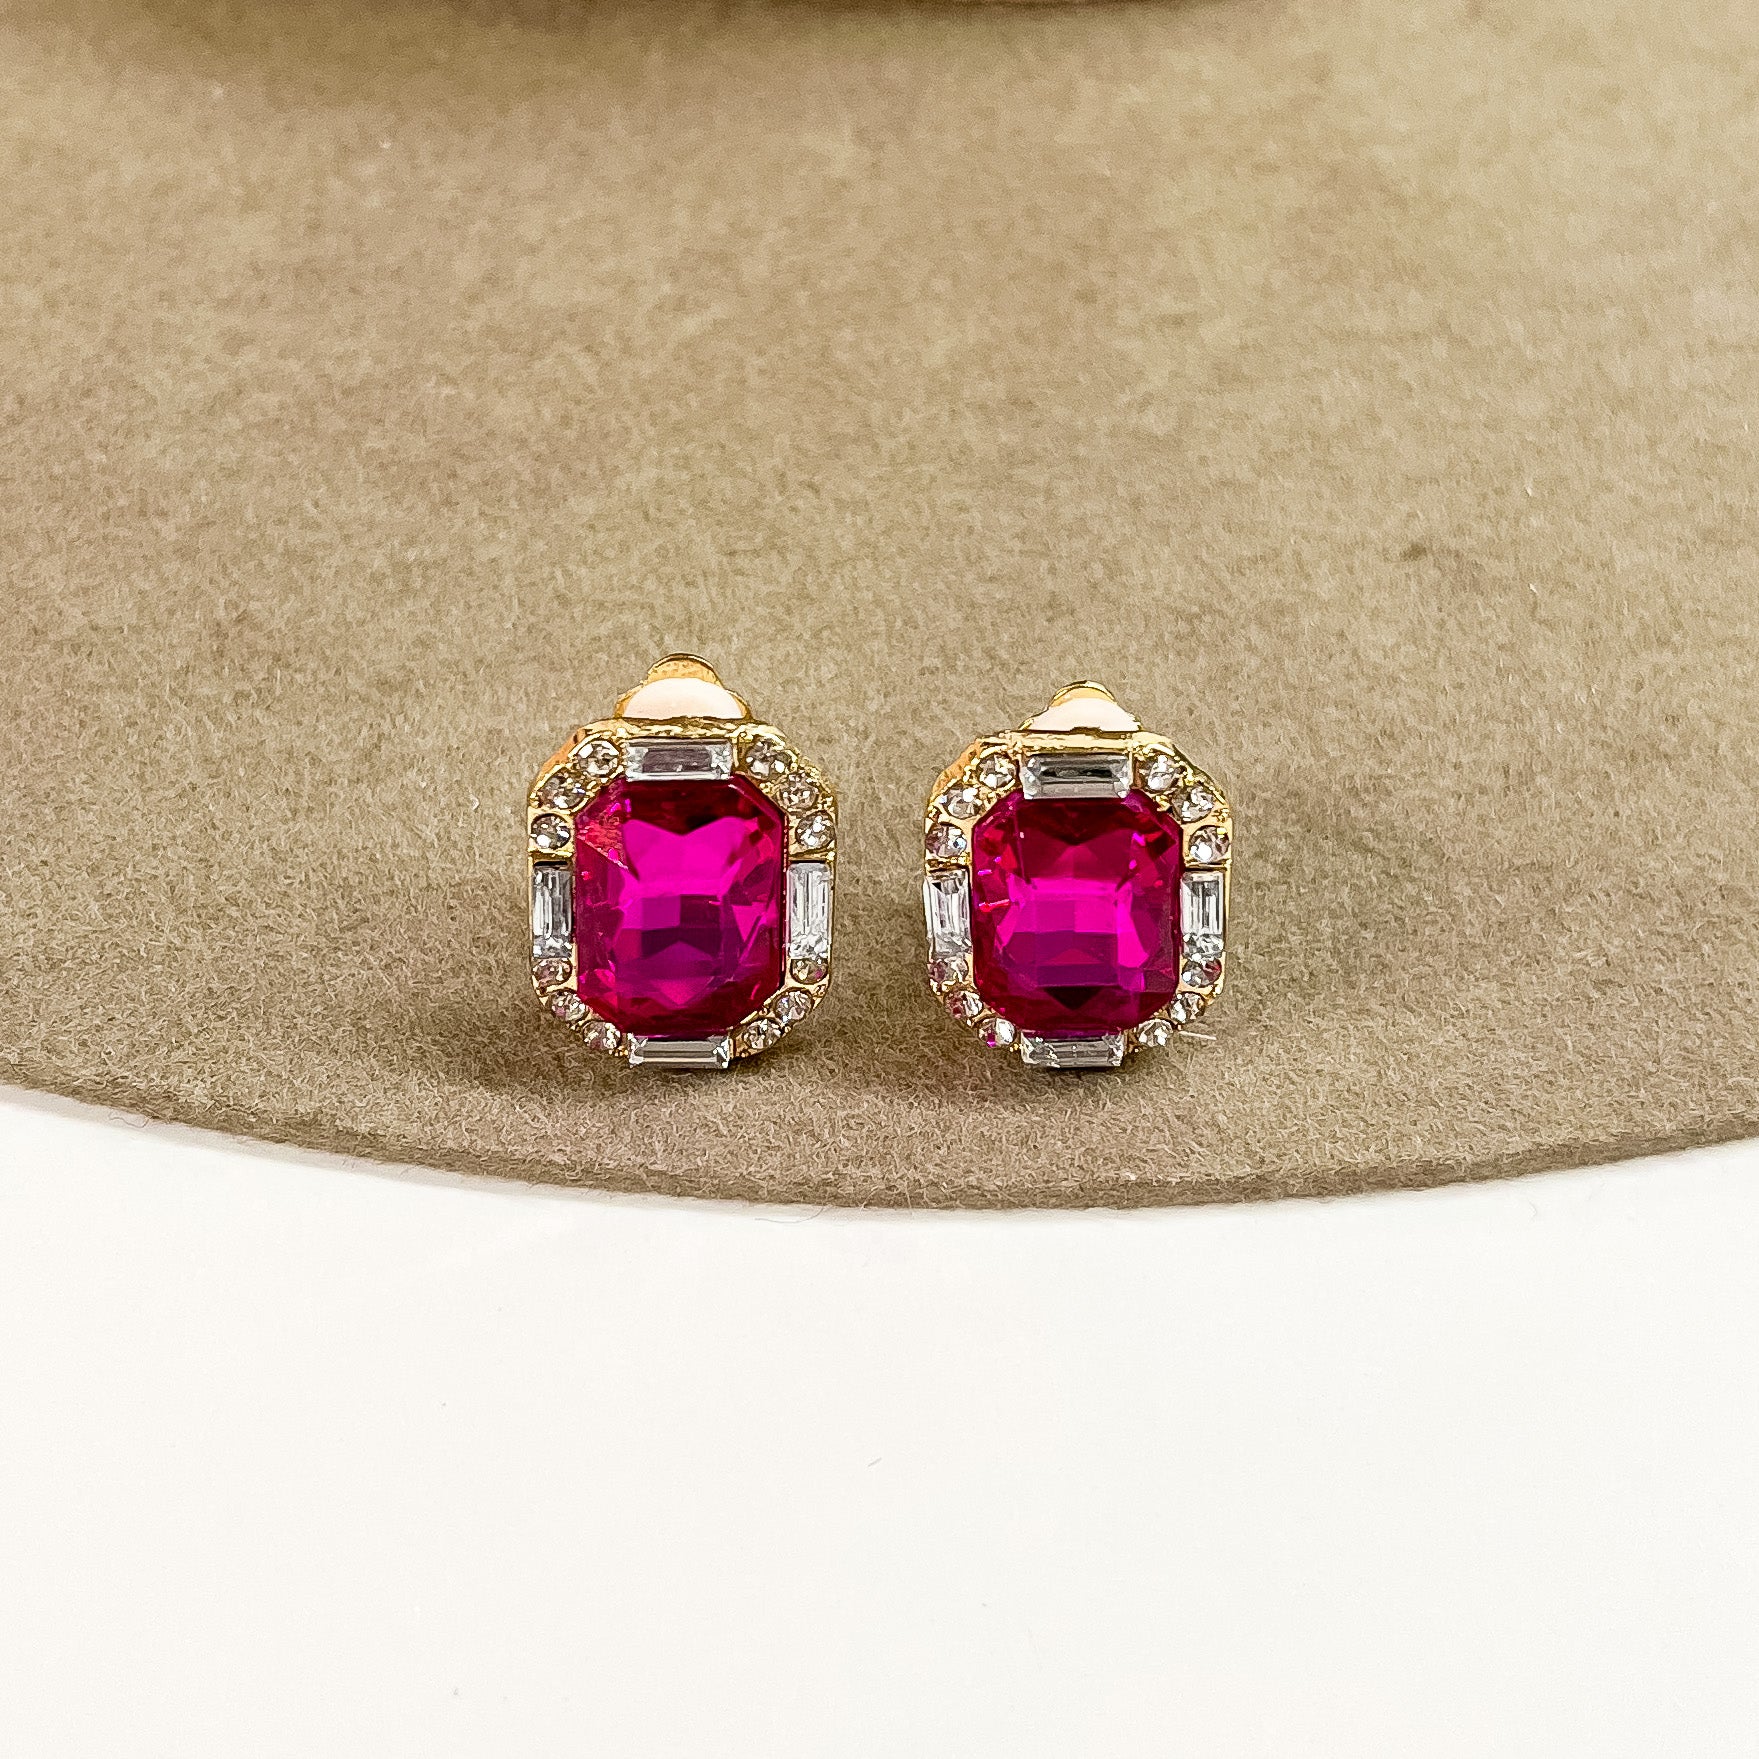 Buy 3 for $10 | Faux Crystal Stud Clip on Earrings with Small Crystal Detailing